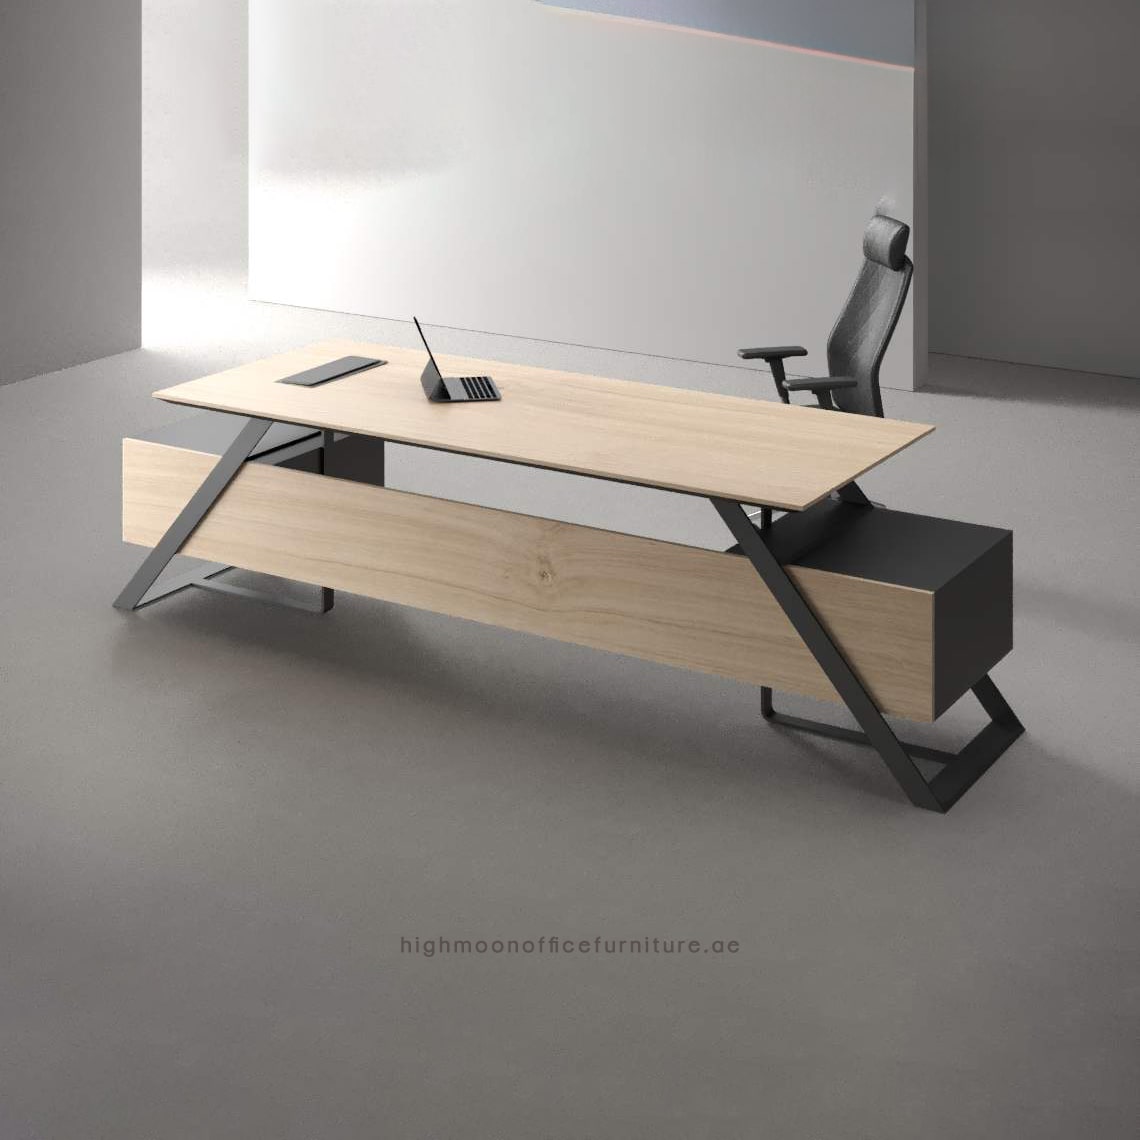 Affordable Office Furniture Designs – Highmoon Office Furniture M